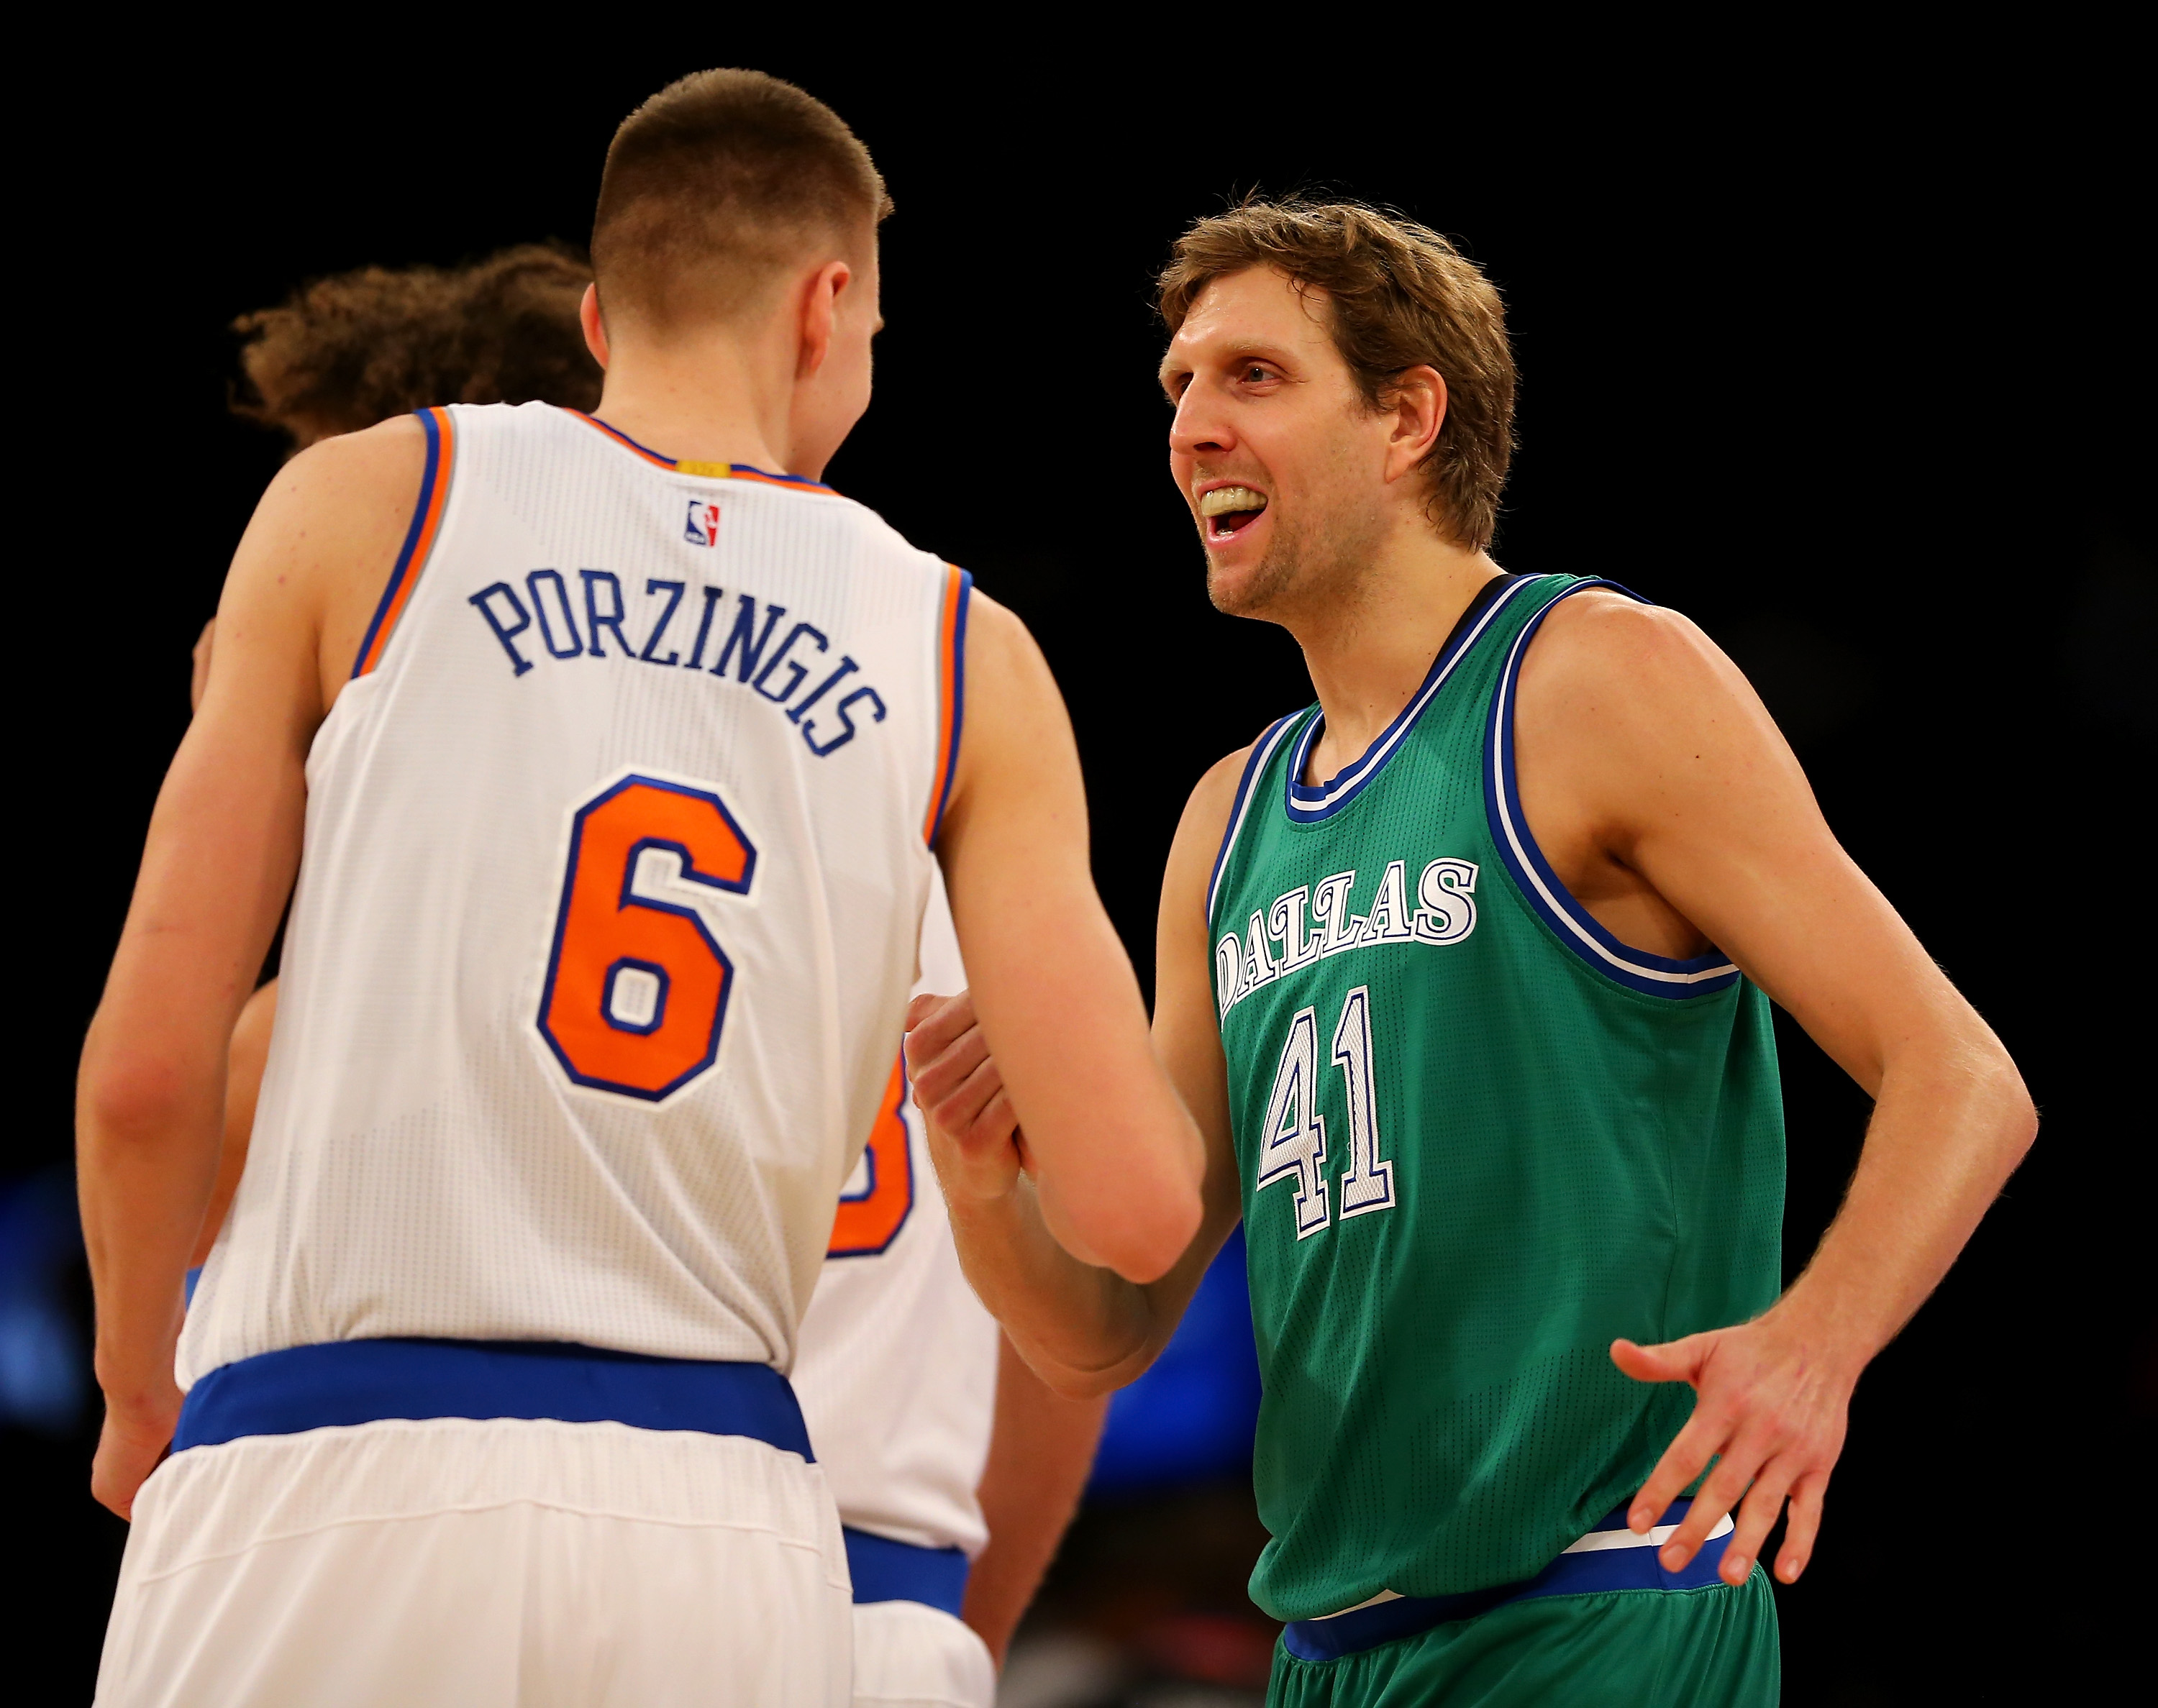 NEW YORK, NY - DECEMBER 07: Kristaps Porzingis #6 of the New York Knicks and Dirk Nowitzki #41 of the Dallas Mavericks greet each other before the opening tipoff at Madison Square Garden on December 7, 2015 in New York City. NOTE TO USER: User expressly acknowledges and agrees that, by downloading and/or using this Photograph, user is consenting to the terms and conditions of the Getty Images License Agreement. (Photo by Elsa/Getty Images)